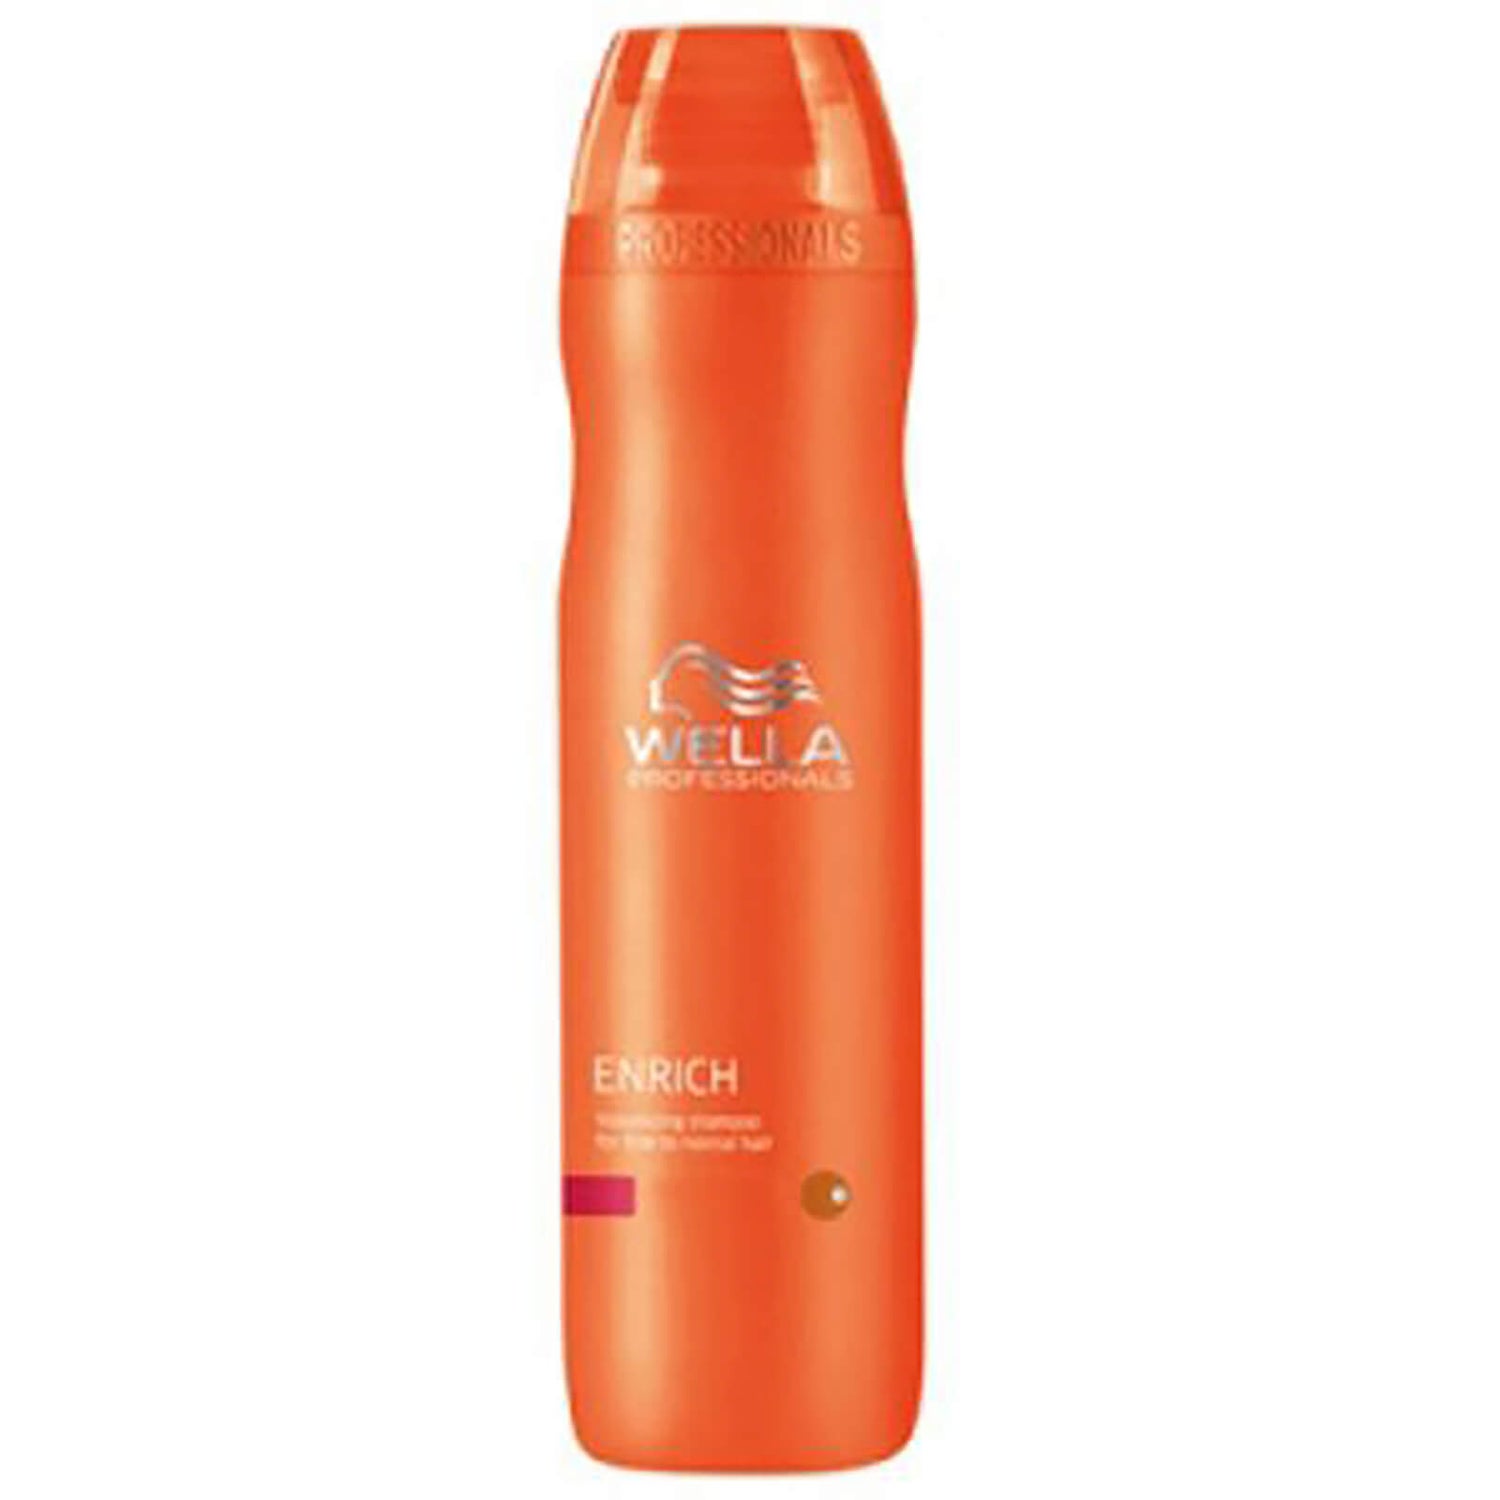 Wella Professionals shampoing volumisant pour cheveux fins/normaux (250ml)